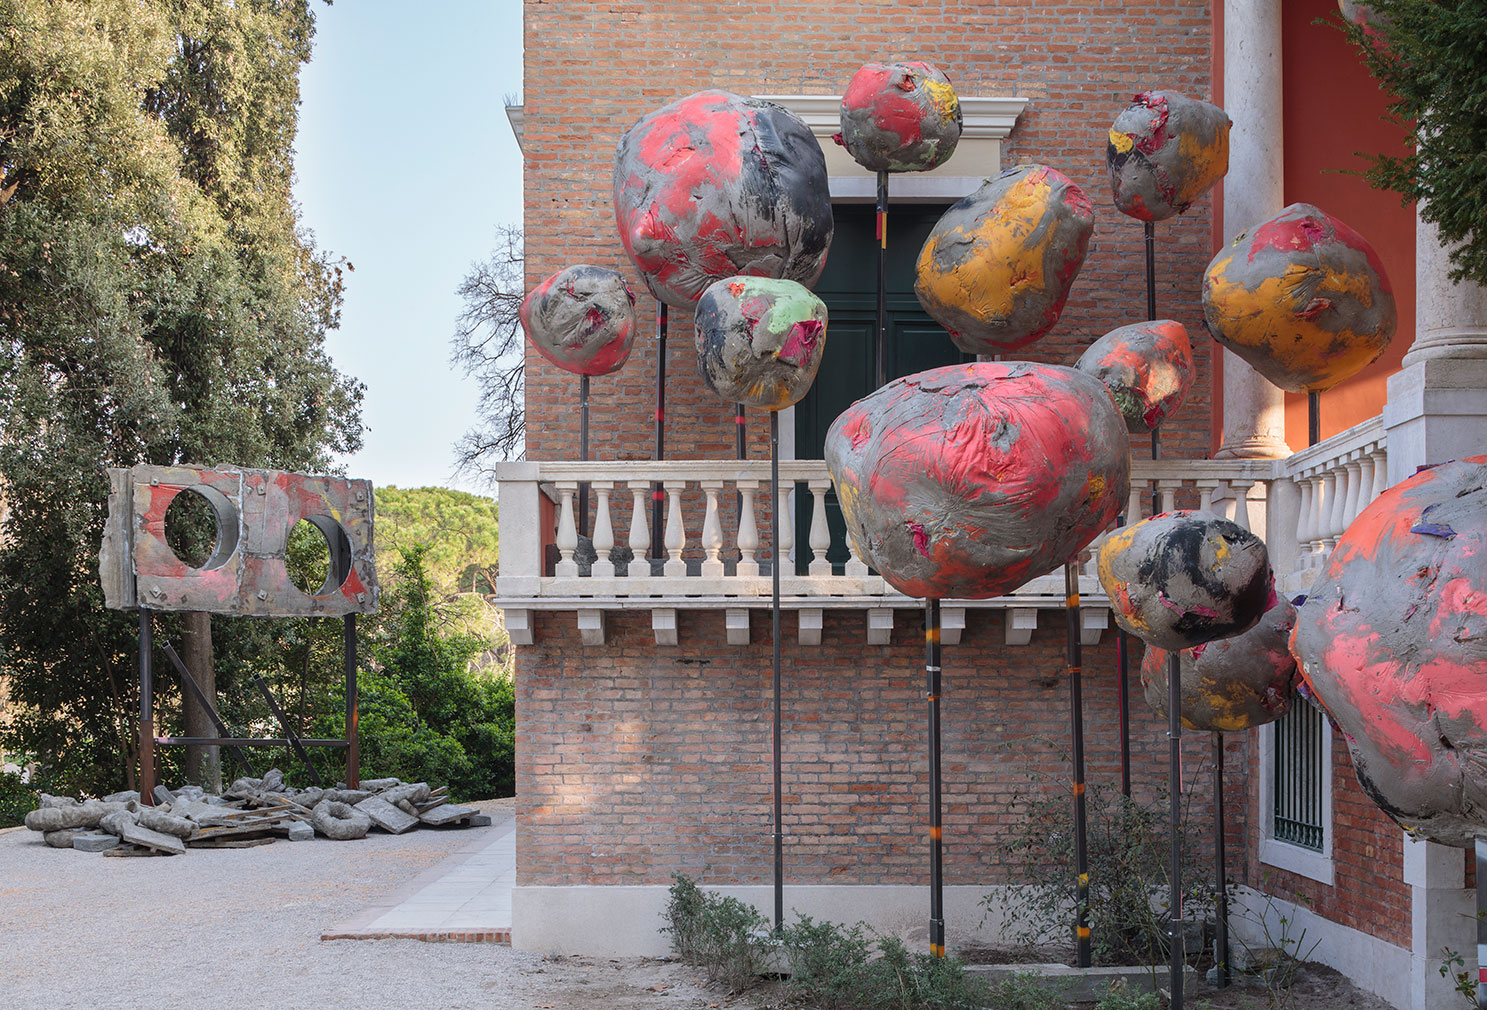 Phyllida Barlow's Folly installation in British Pavilion at the Venice Biennale